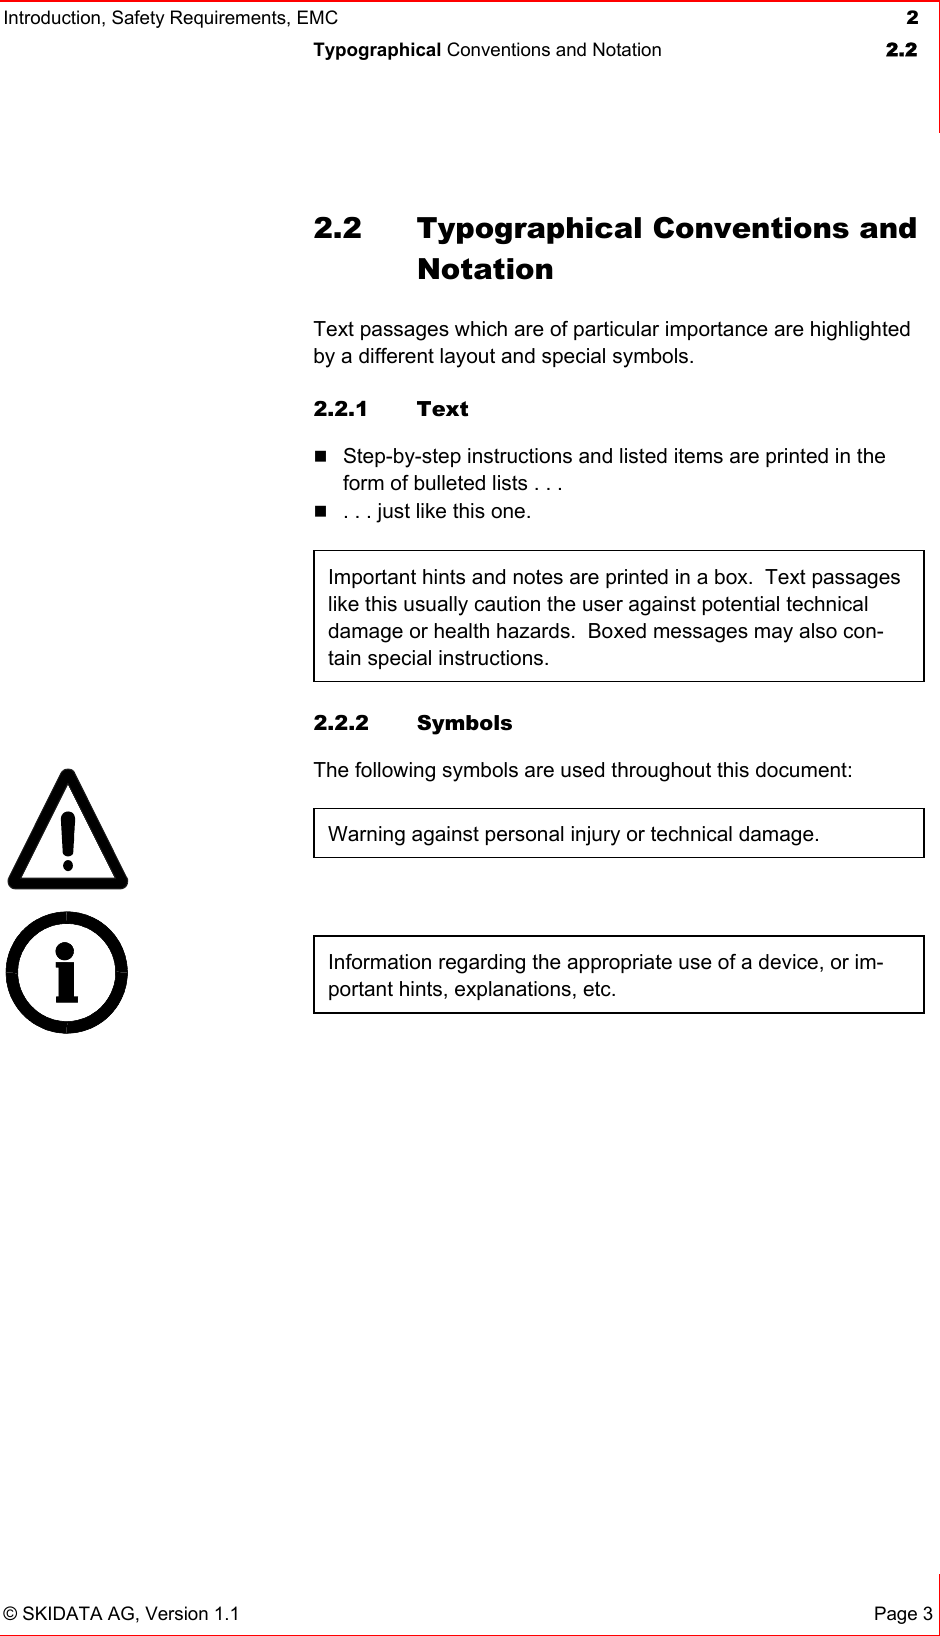 Introduction, Safety Requirements, EMC  2 Typographical Conventions and Notation  2.2   © SKIDATA AG, Version 1.1 Page 3 2.2  Typographical Conventions and Notation Text passages which are of particular importance are highlighted by a different layout and special symbols. 2.2.1 Text  Step-by-step instructions and listed items are printed in the form of bulleted lists . . .  . . . just like this one.  Important hints and notes are printed in a box.  Text passages like this usually caution the user against potential technical damage or health hazards.  Boxed messages may also con-tain special instructions.  2.2.2 Symbols The following symbols are used throughout this document: Warning against personal injury or technical damage.  Information regarding the appropriate use of a device, or im-portant hints, explanations, etc.   